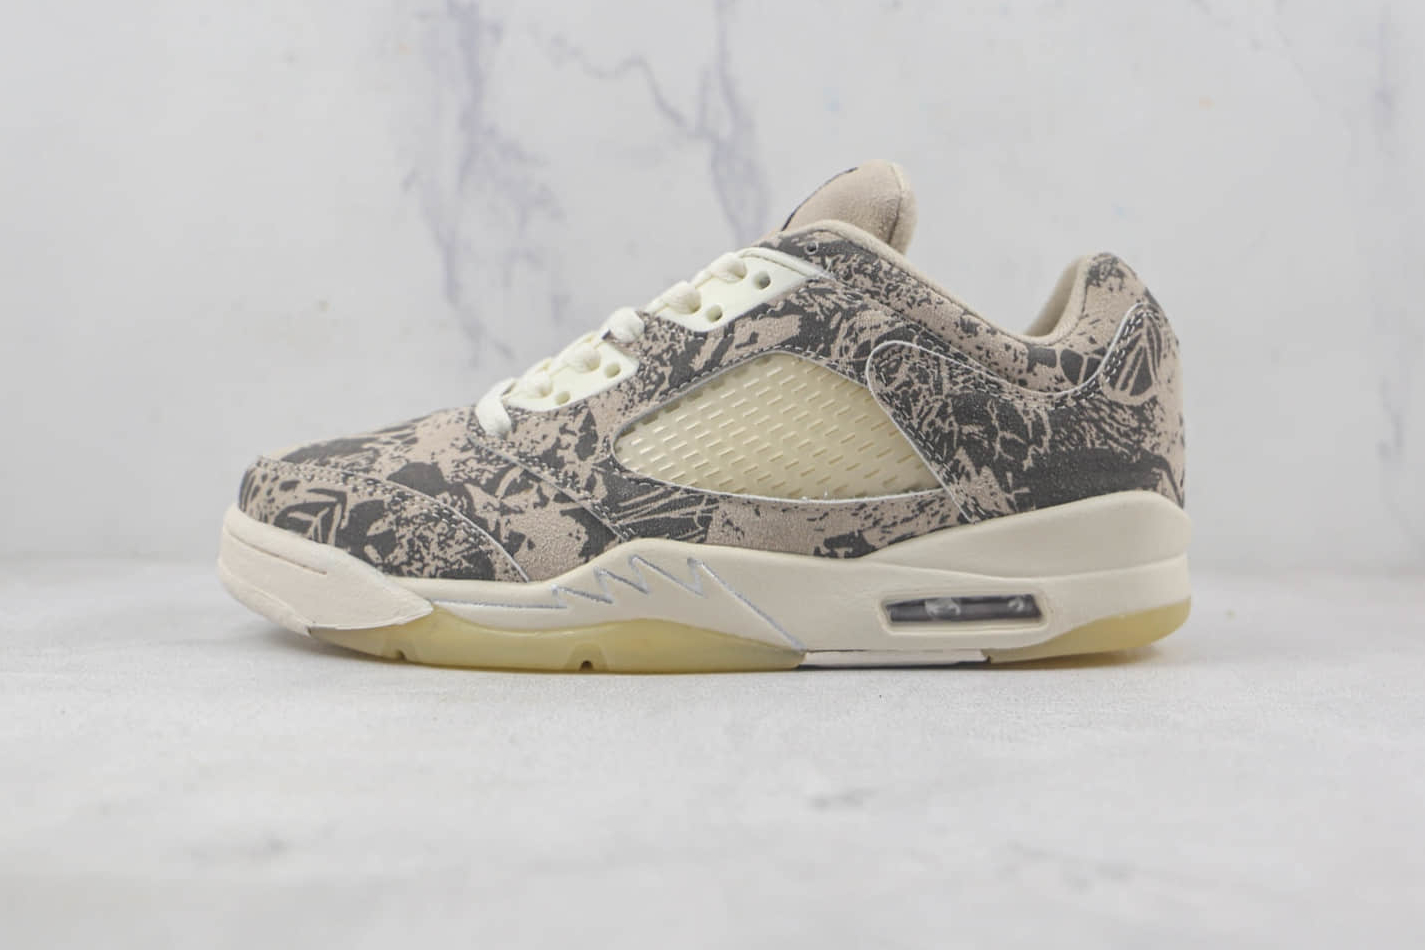 Air Jordan 5 Retro Low 'Expression' DA8016-100 - Stylish and Iconic Sneakers